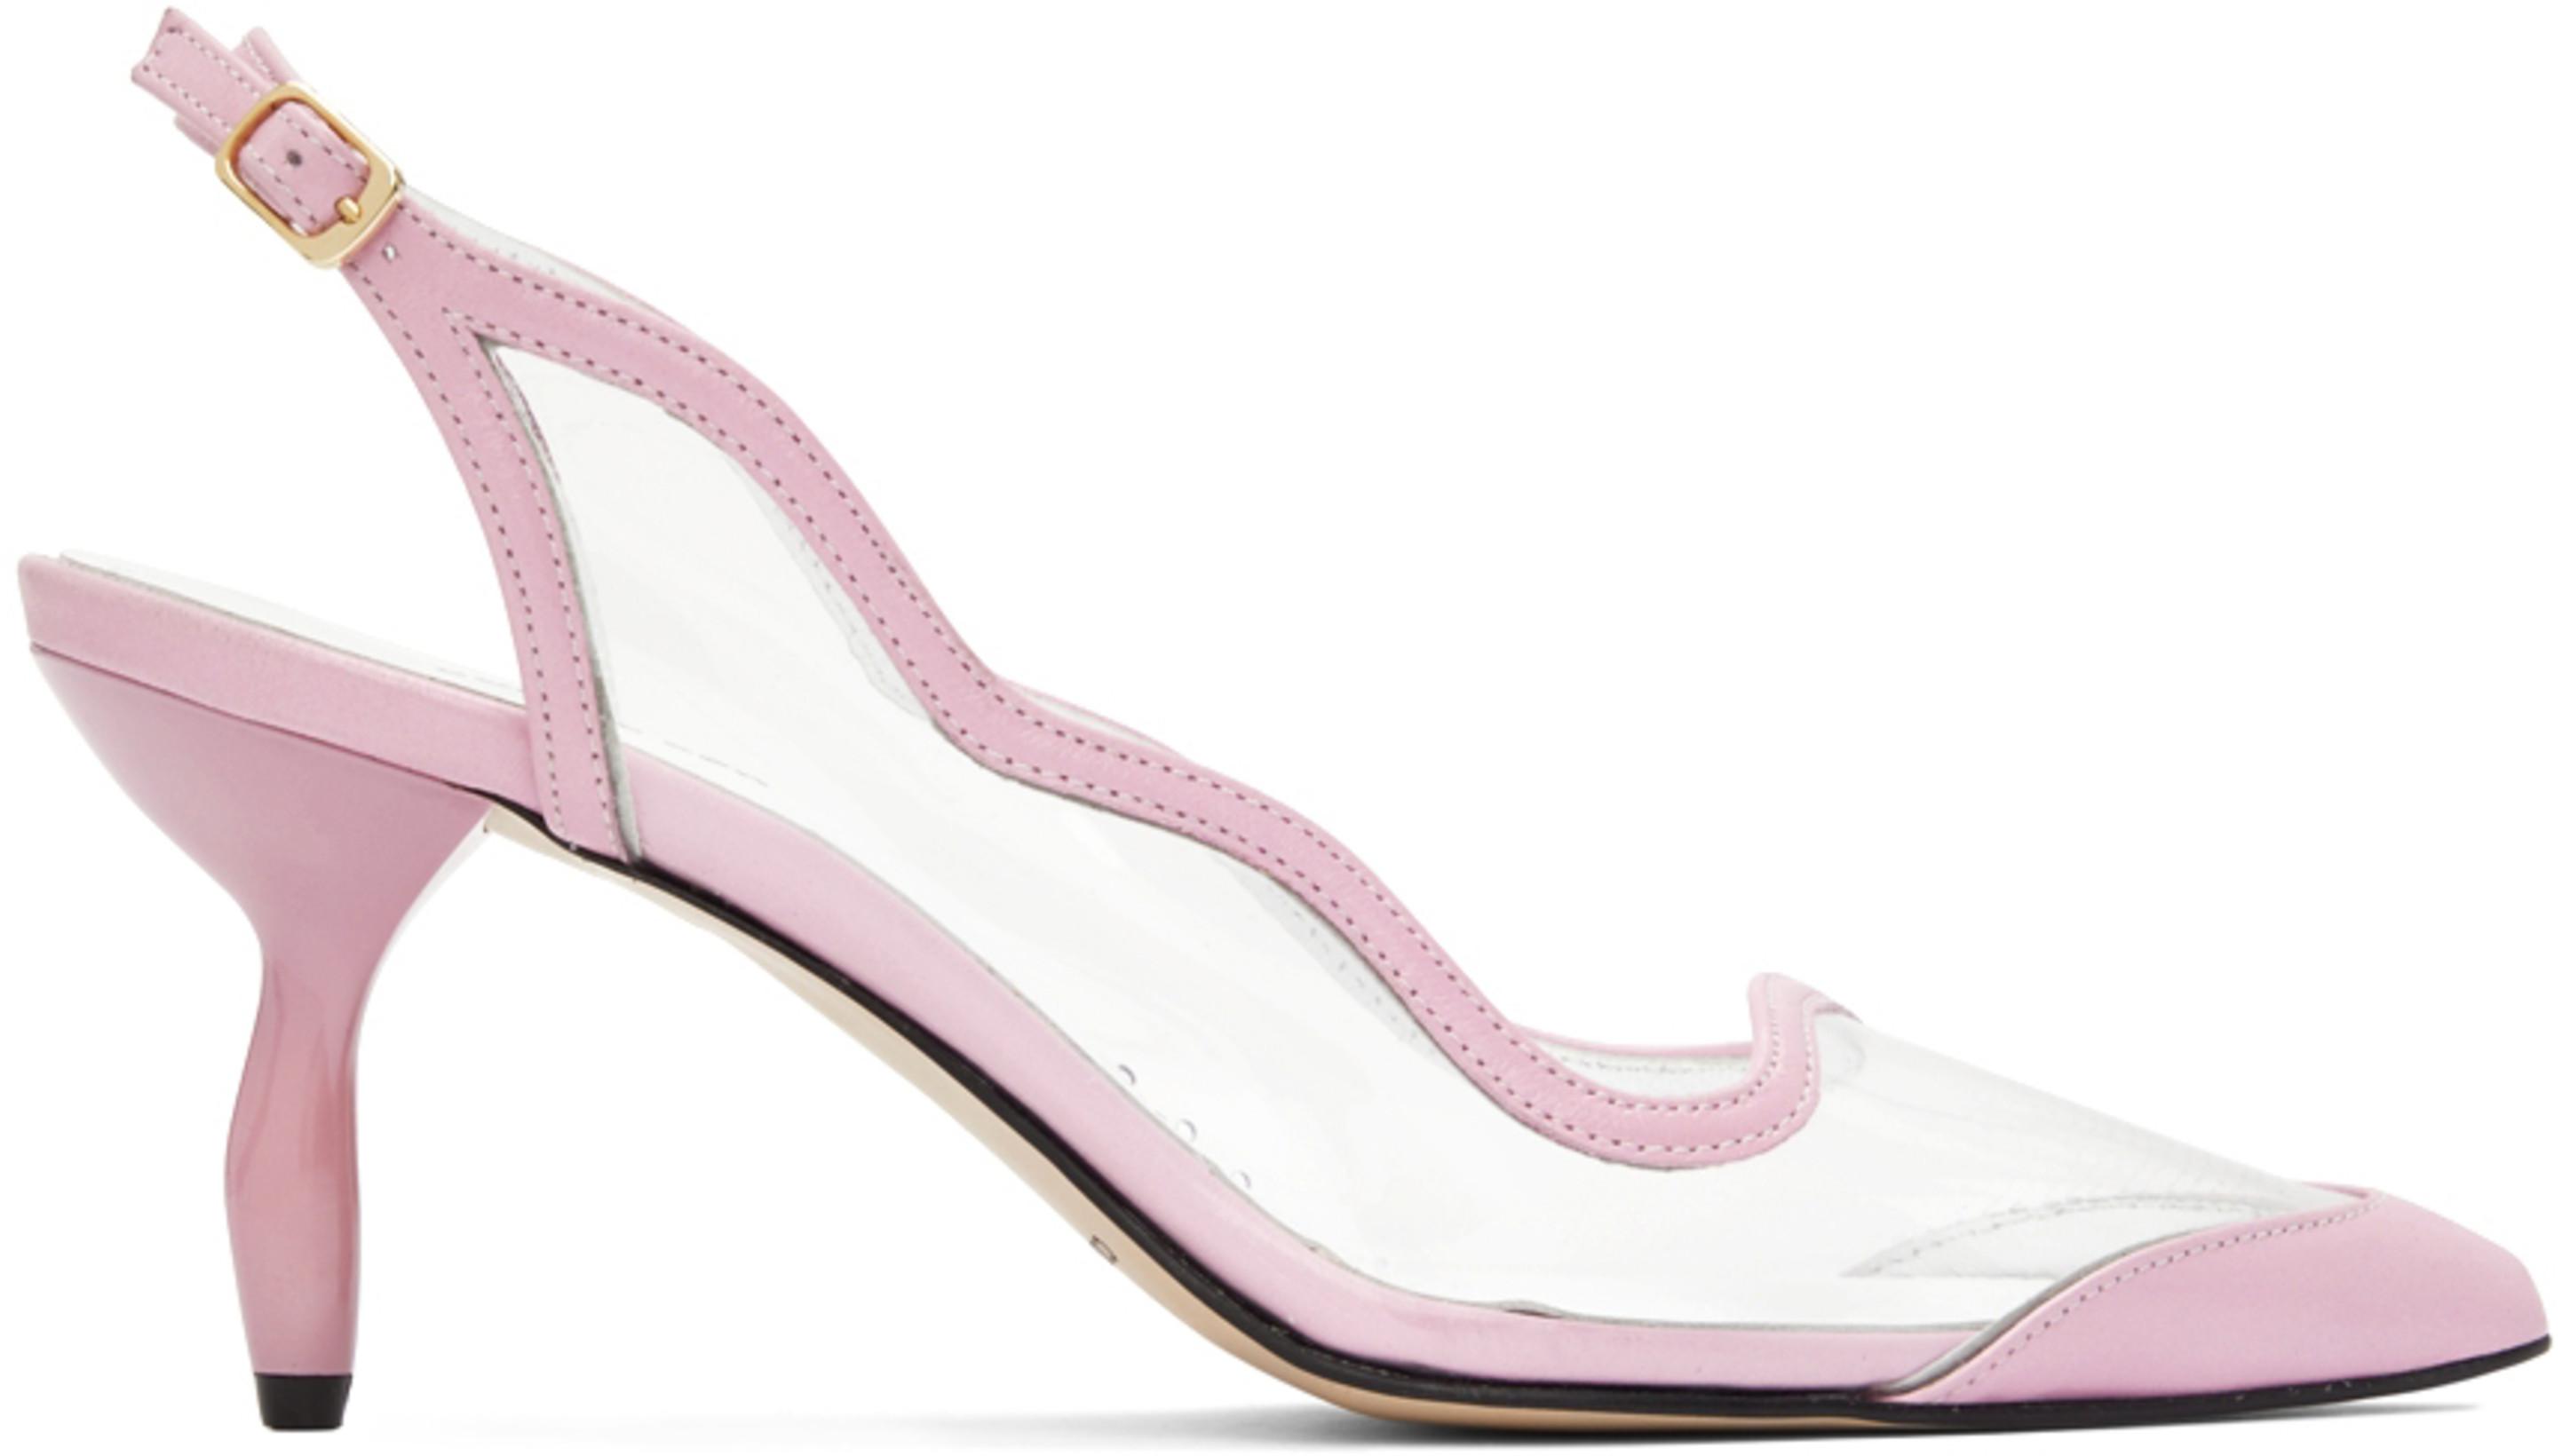 SSENSE Exclusive Pink Silhouette Glossy Heels by COMME SE-A